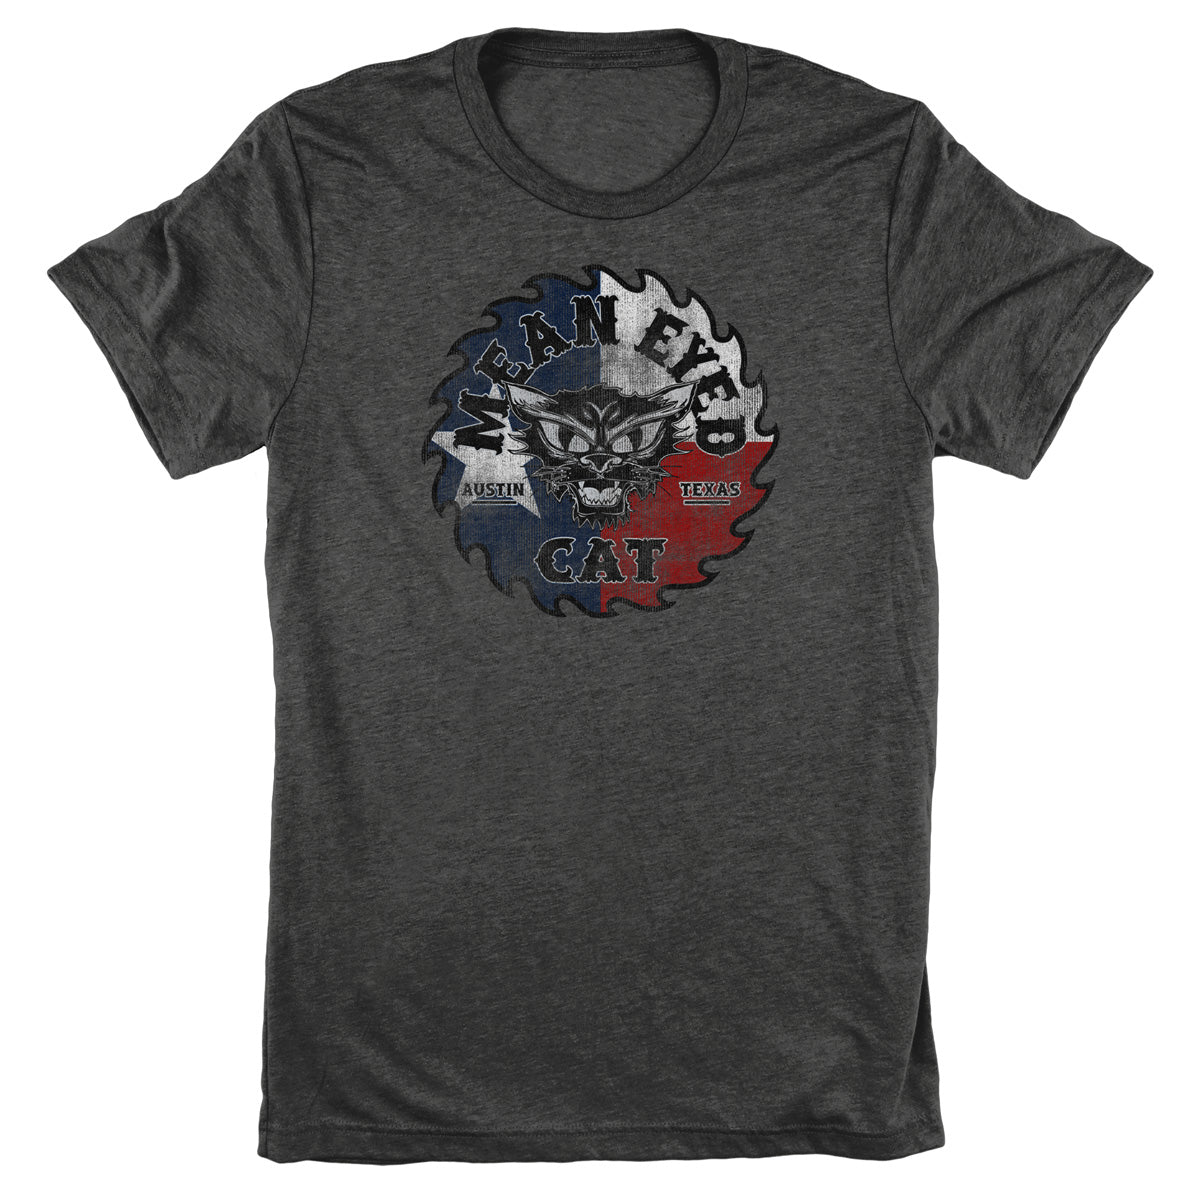 Mean Eyed Cat Saw Blade Texas Tee